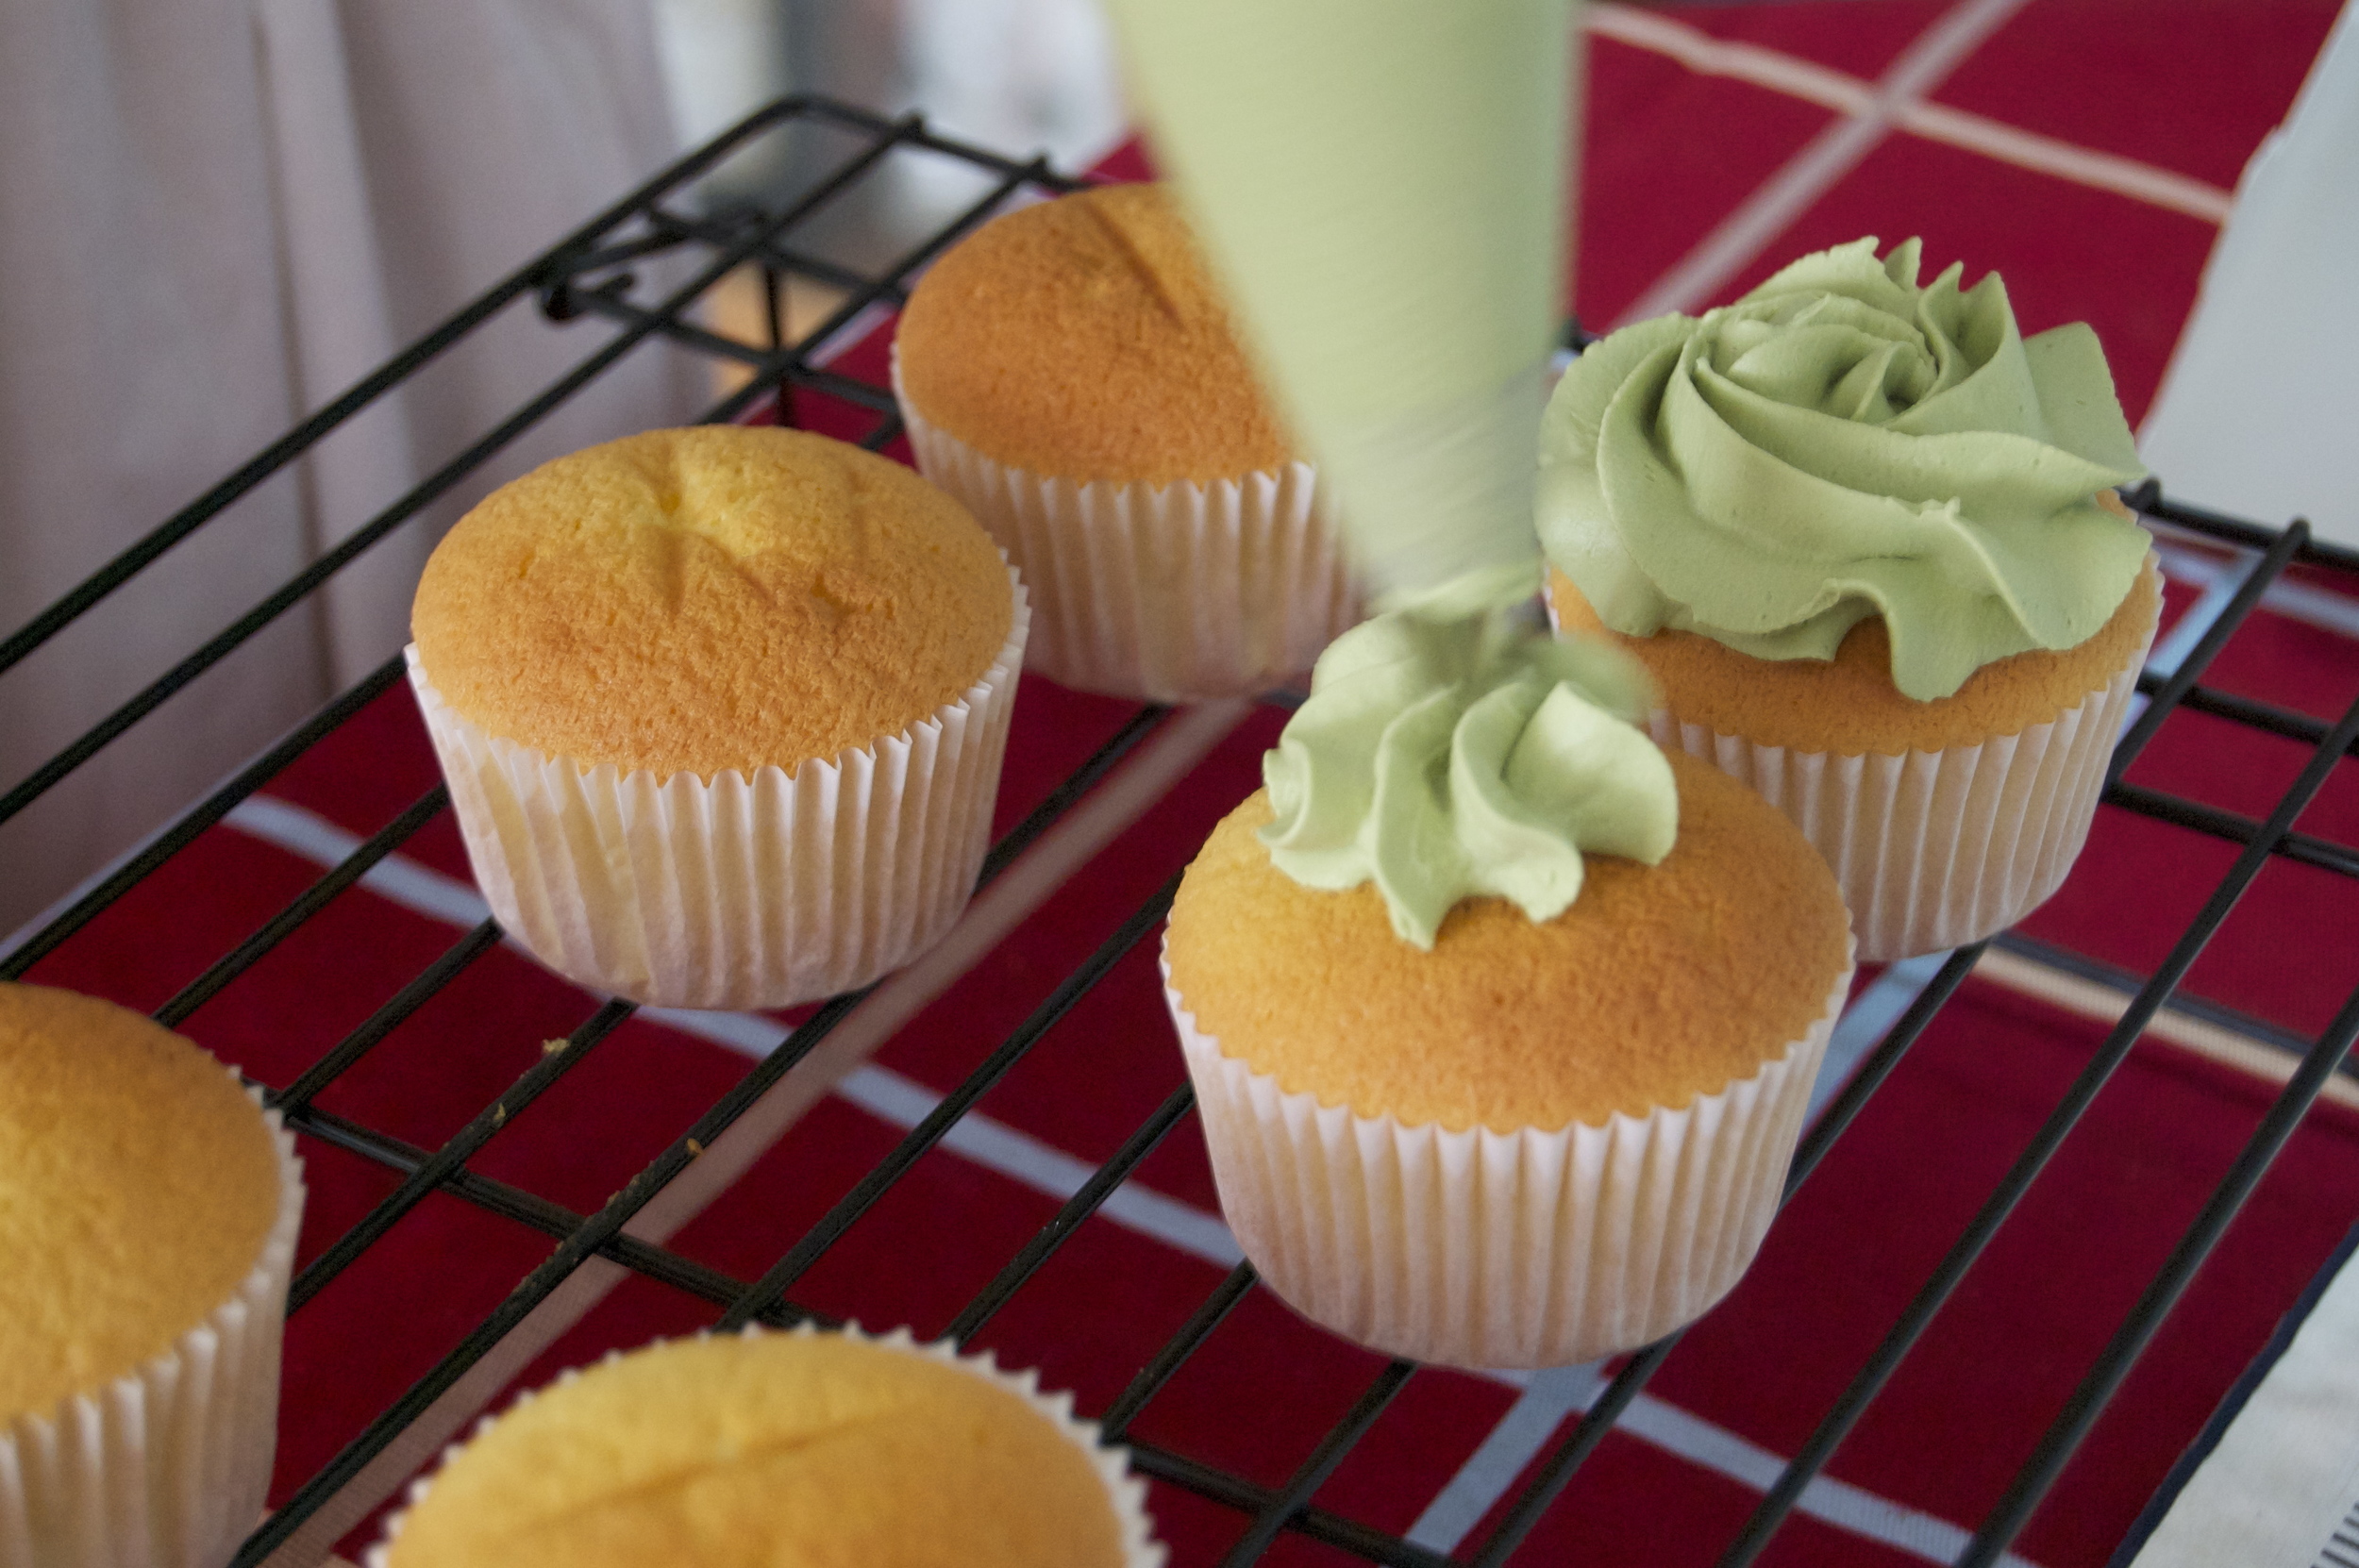 Piping green tea frosting onto the cupcakes.